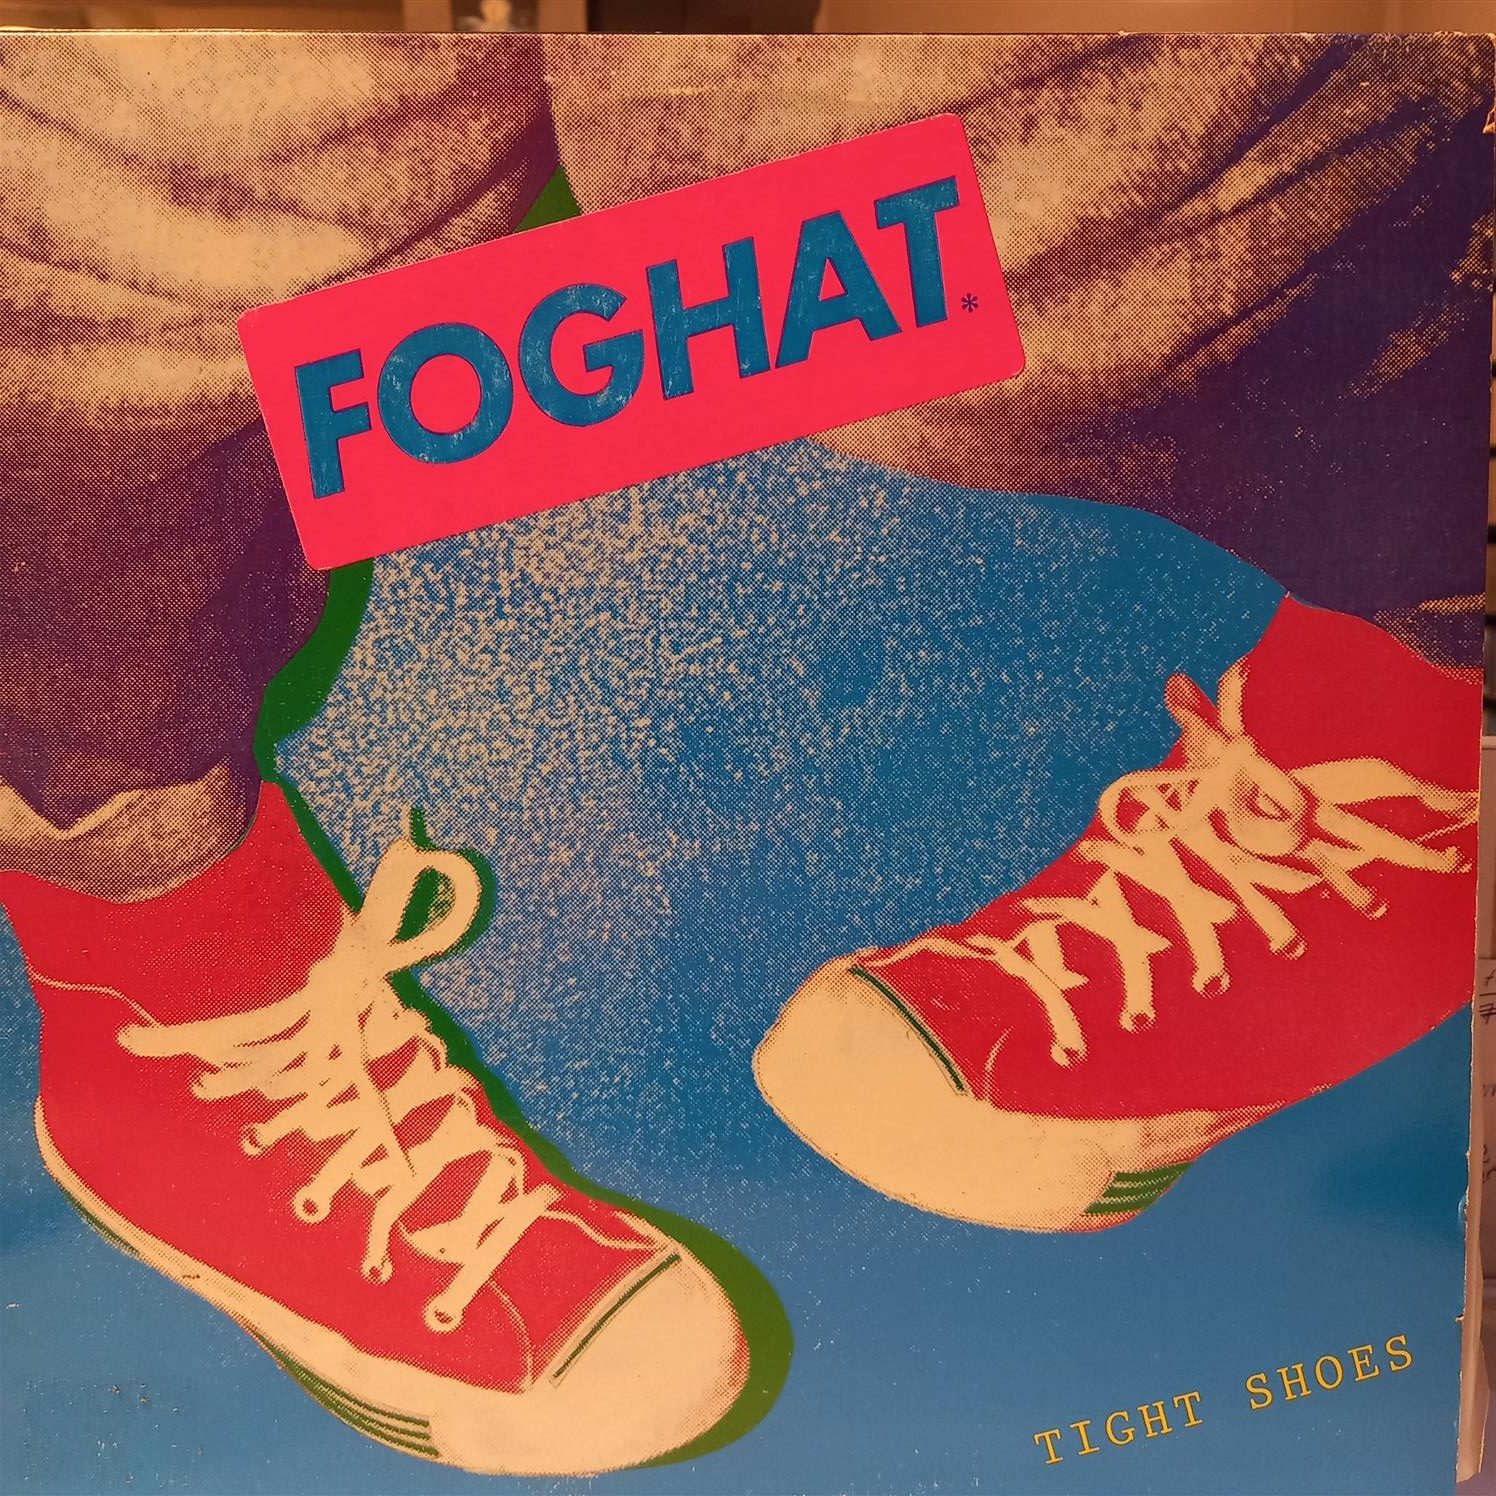 FOGHAT – TIGHT SHOES ON